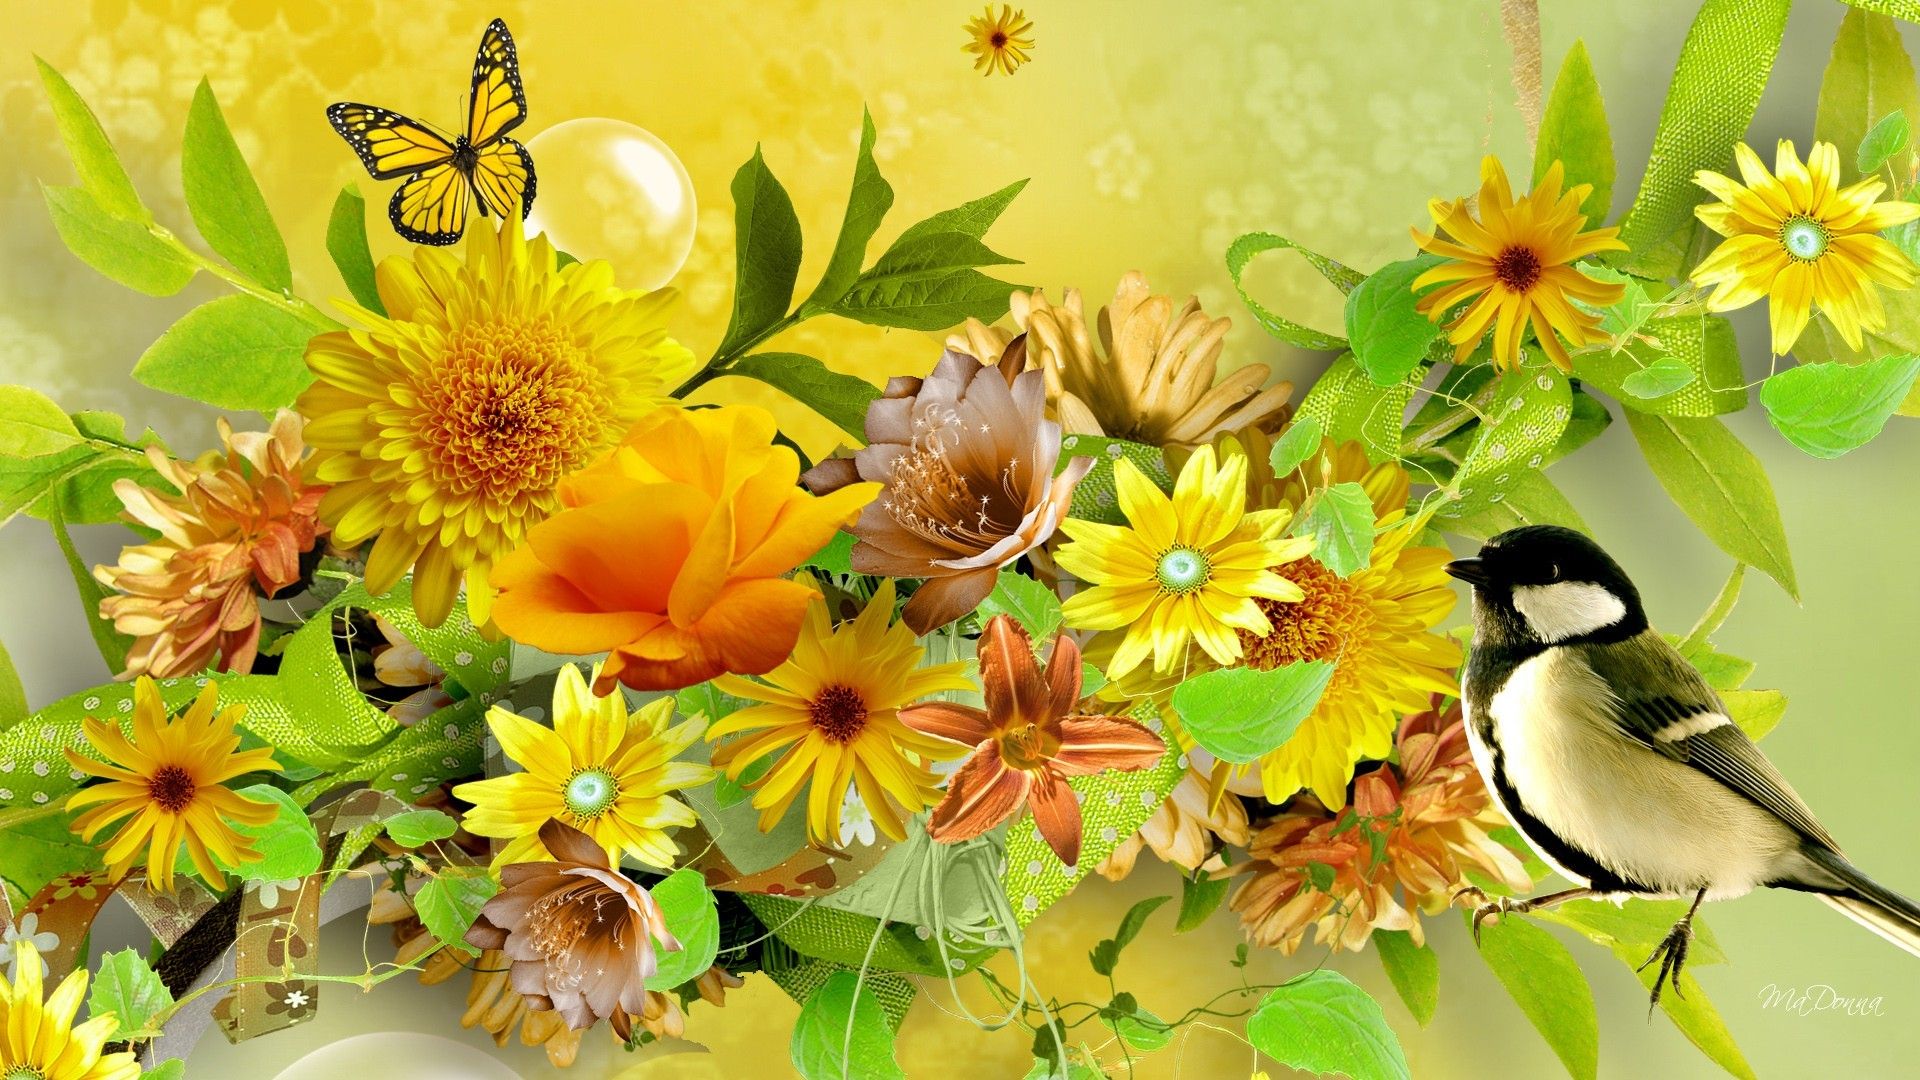 Spring Collage HD Wallpaper. Background Imagex1080